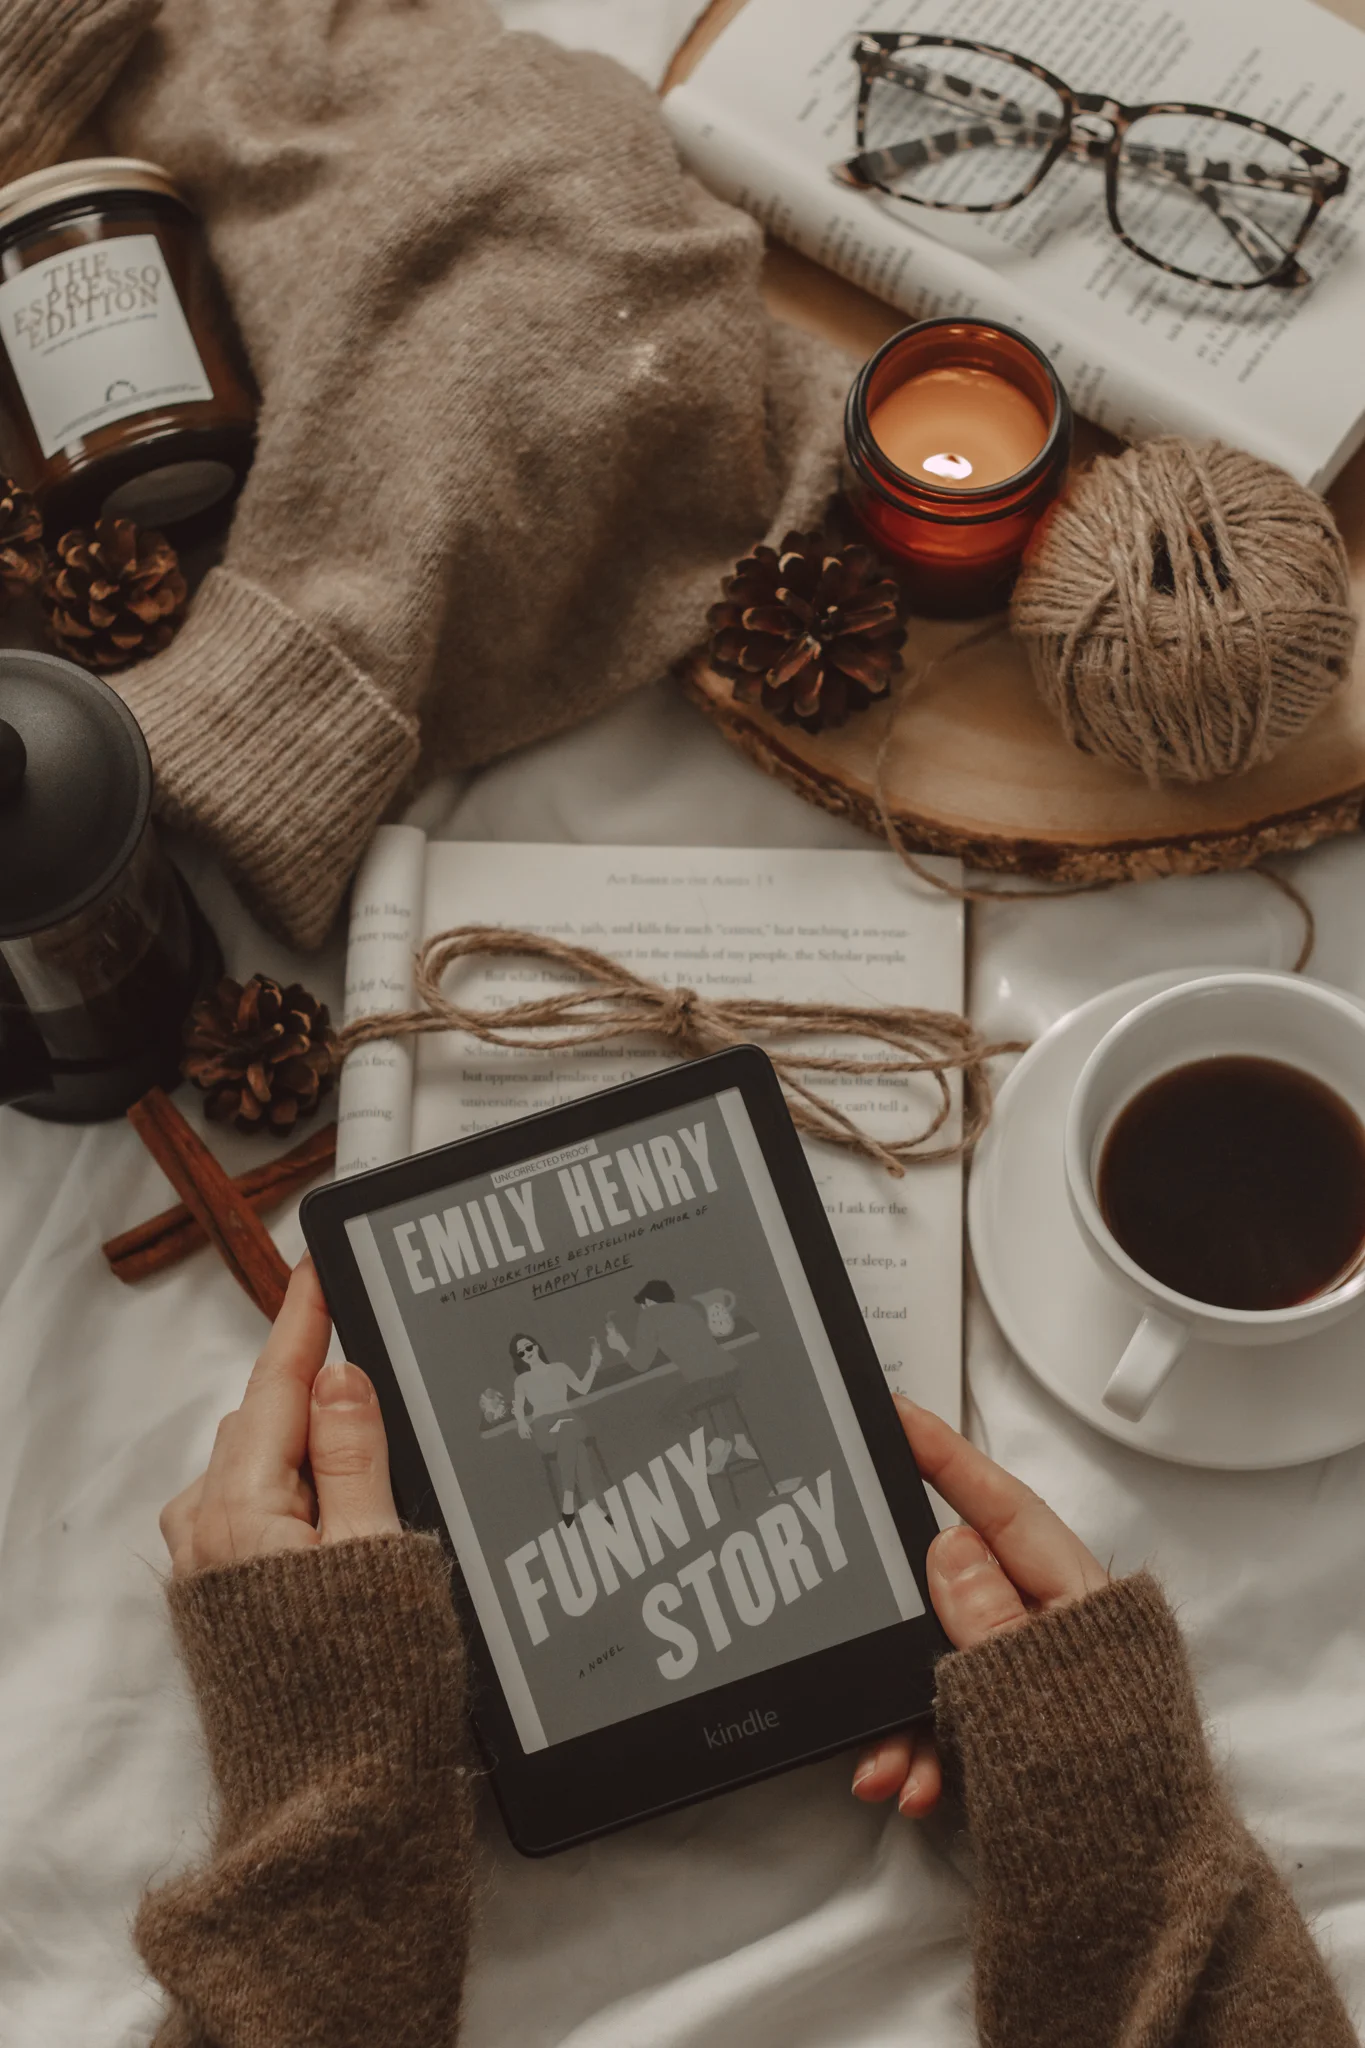 Why “Funny Story” is Yet Another Excellent Romcom by Emily Henry by The Espresso Edition cozy bookish blog